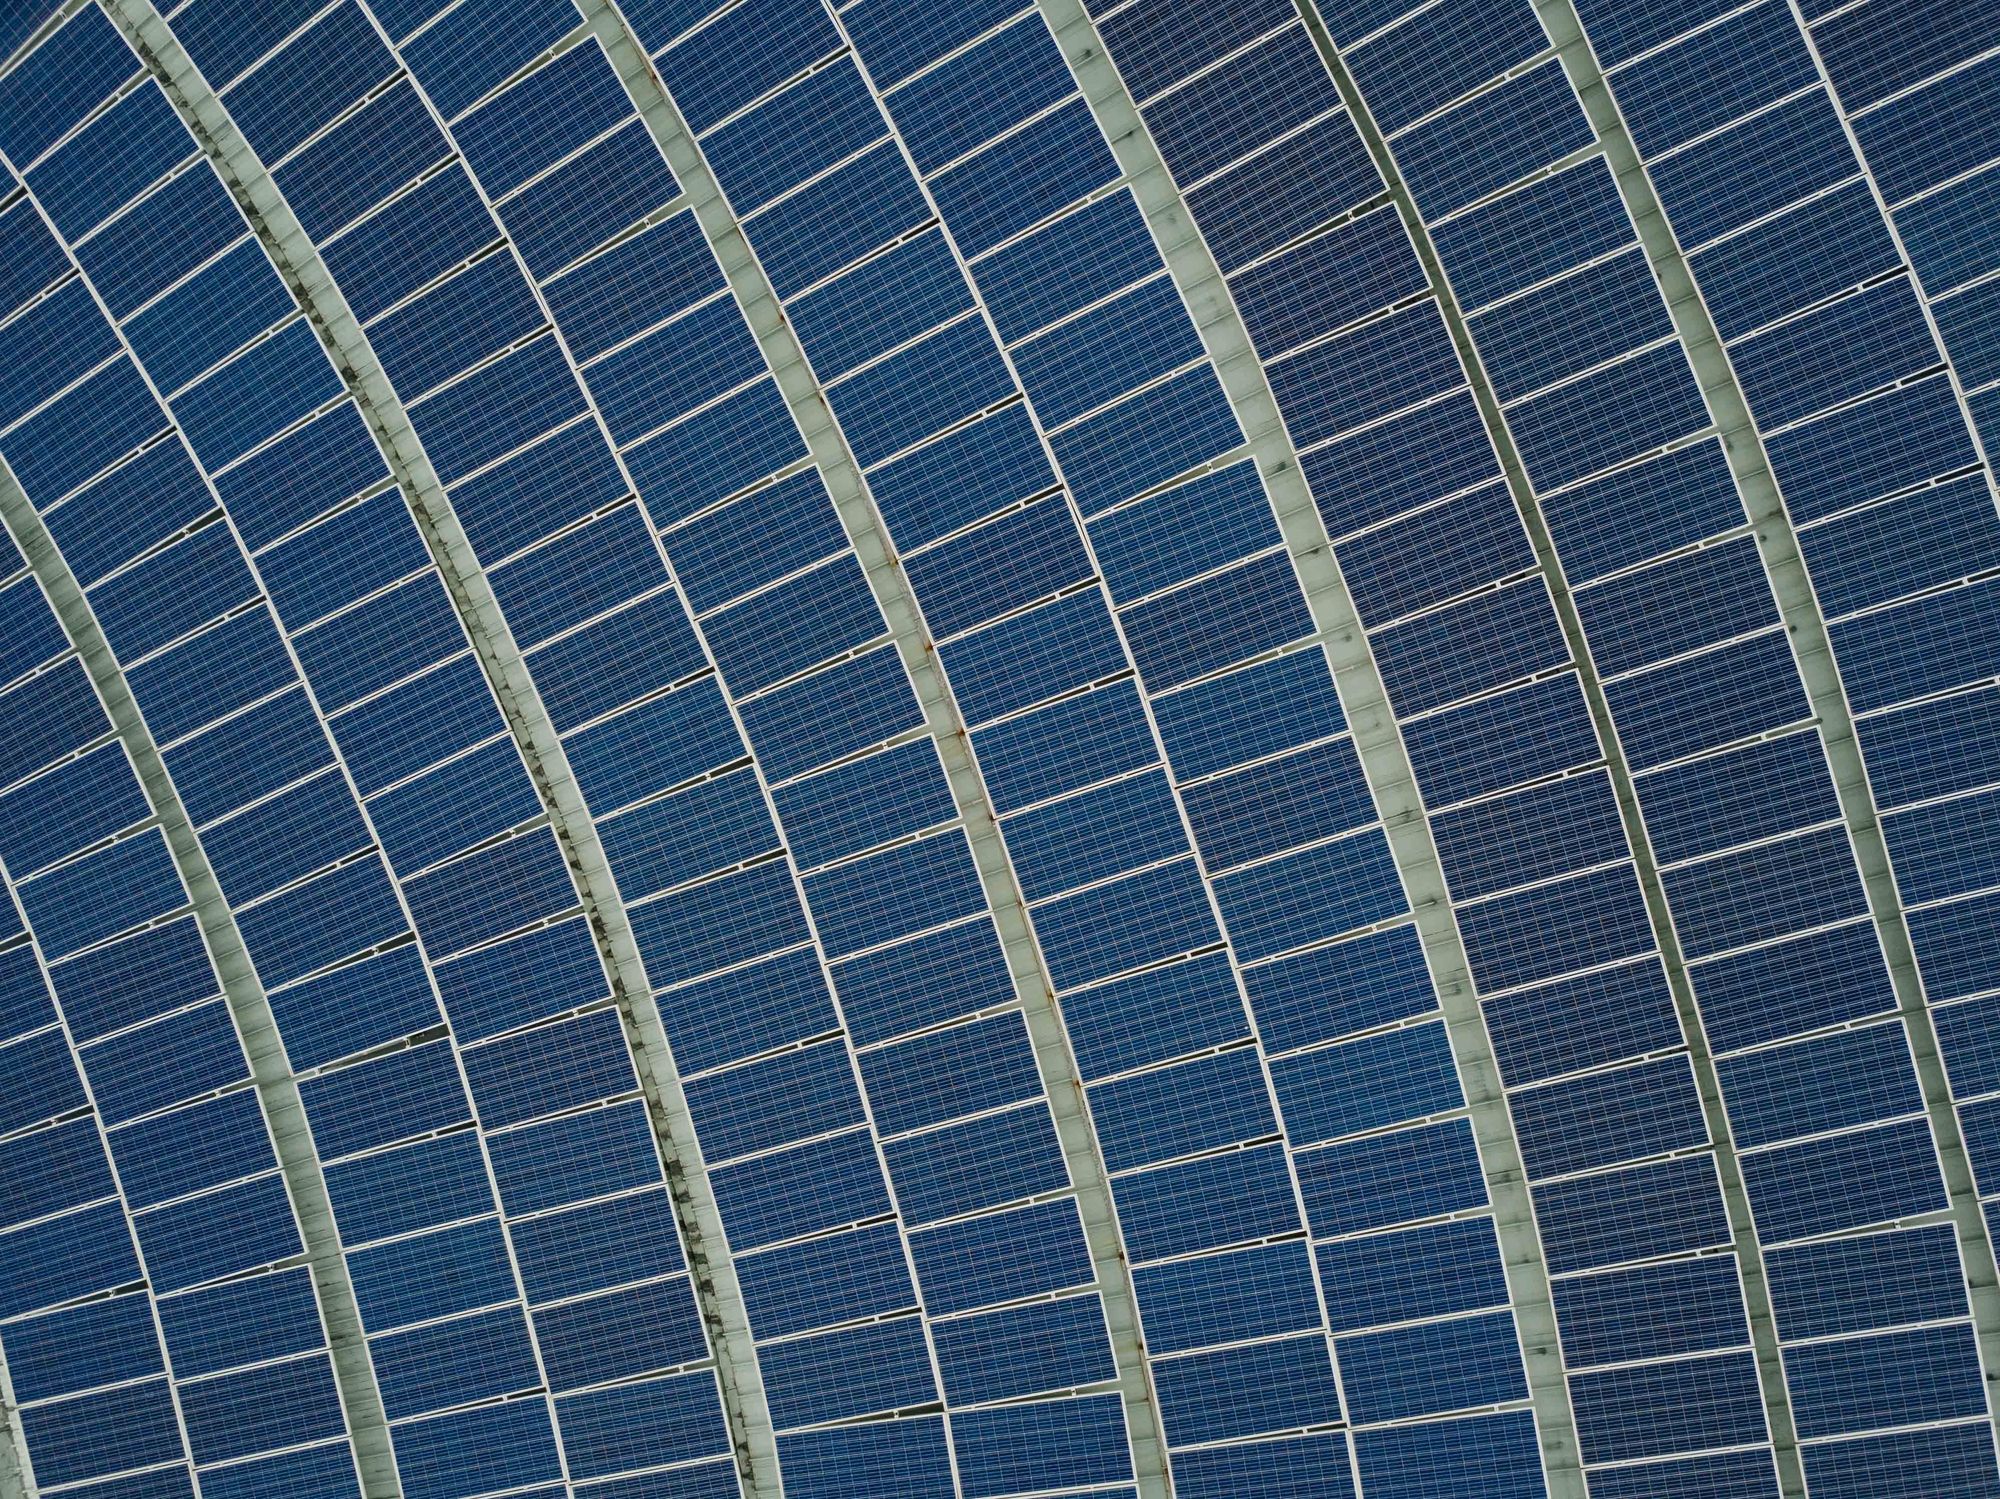 AltEnergyMag: Wunder Capital Is Revolutionizing the Commercial Solar Market